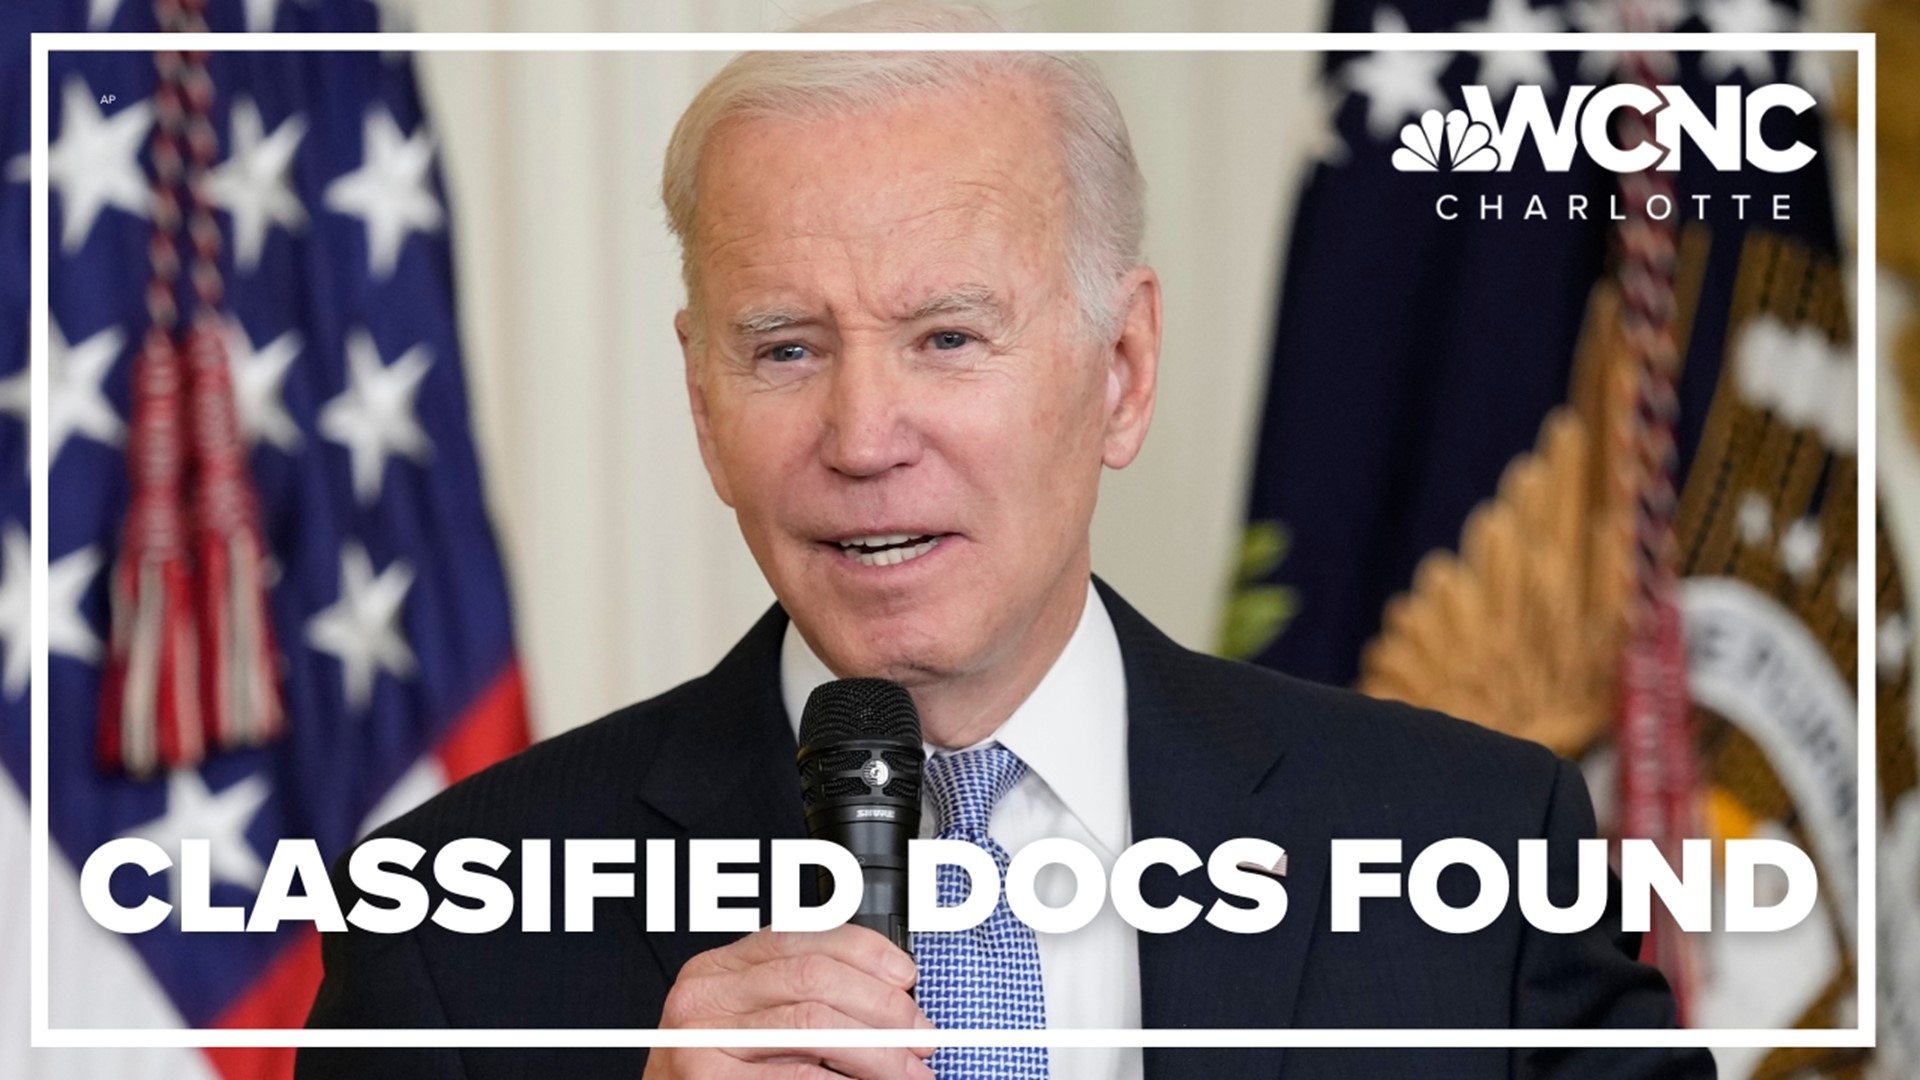 The Justice department found more documents in President Biden's home, from his time in Senate and as Vice President.